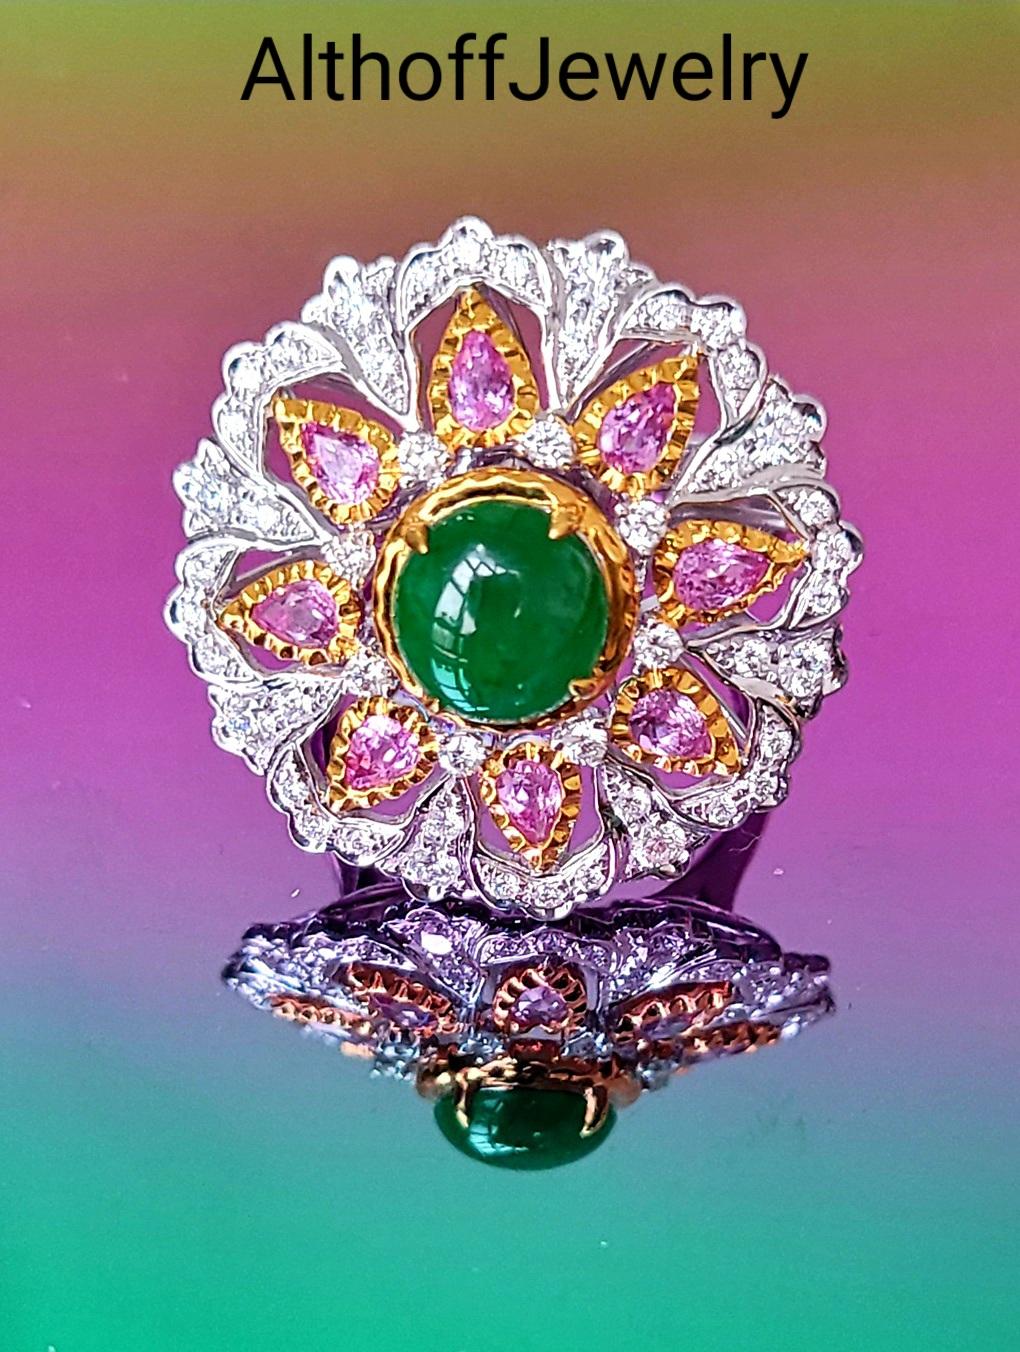 18K WHITE YELLOW RING WITH DIAMOND & JADE  & PINK SAPPHIRE

It's a very special Goddess Ring and has special powers of Jade. 
Healing with Jade
A protective stone, Jade keeps the wearer from harm and brings harmony. Jade attracts good luck and